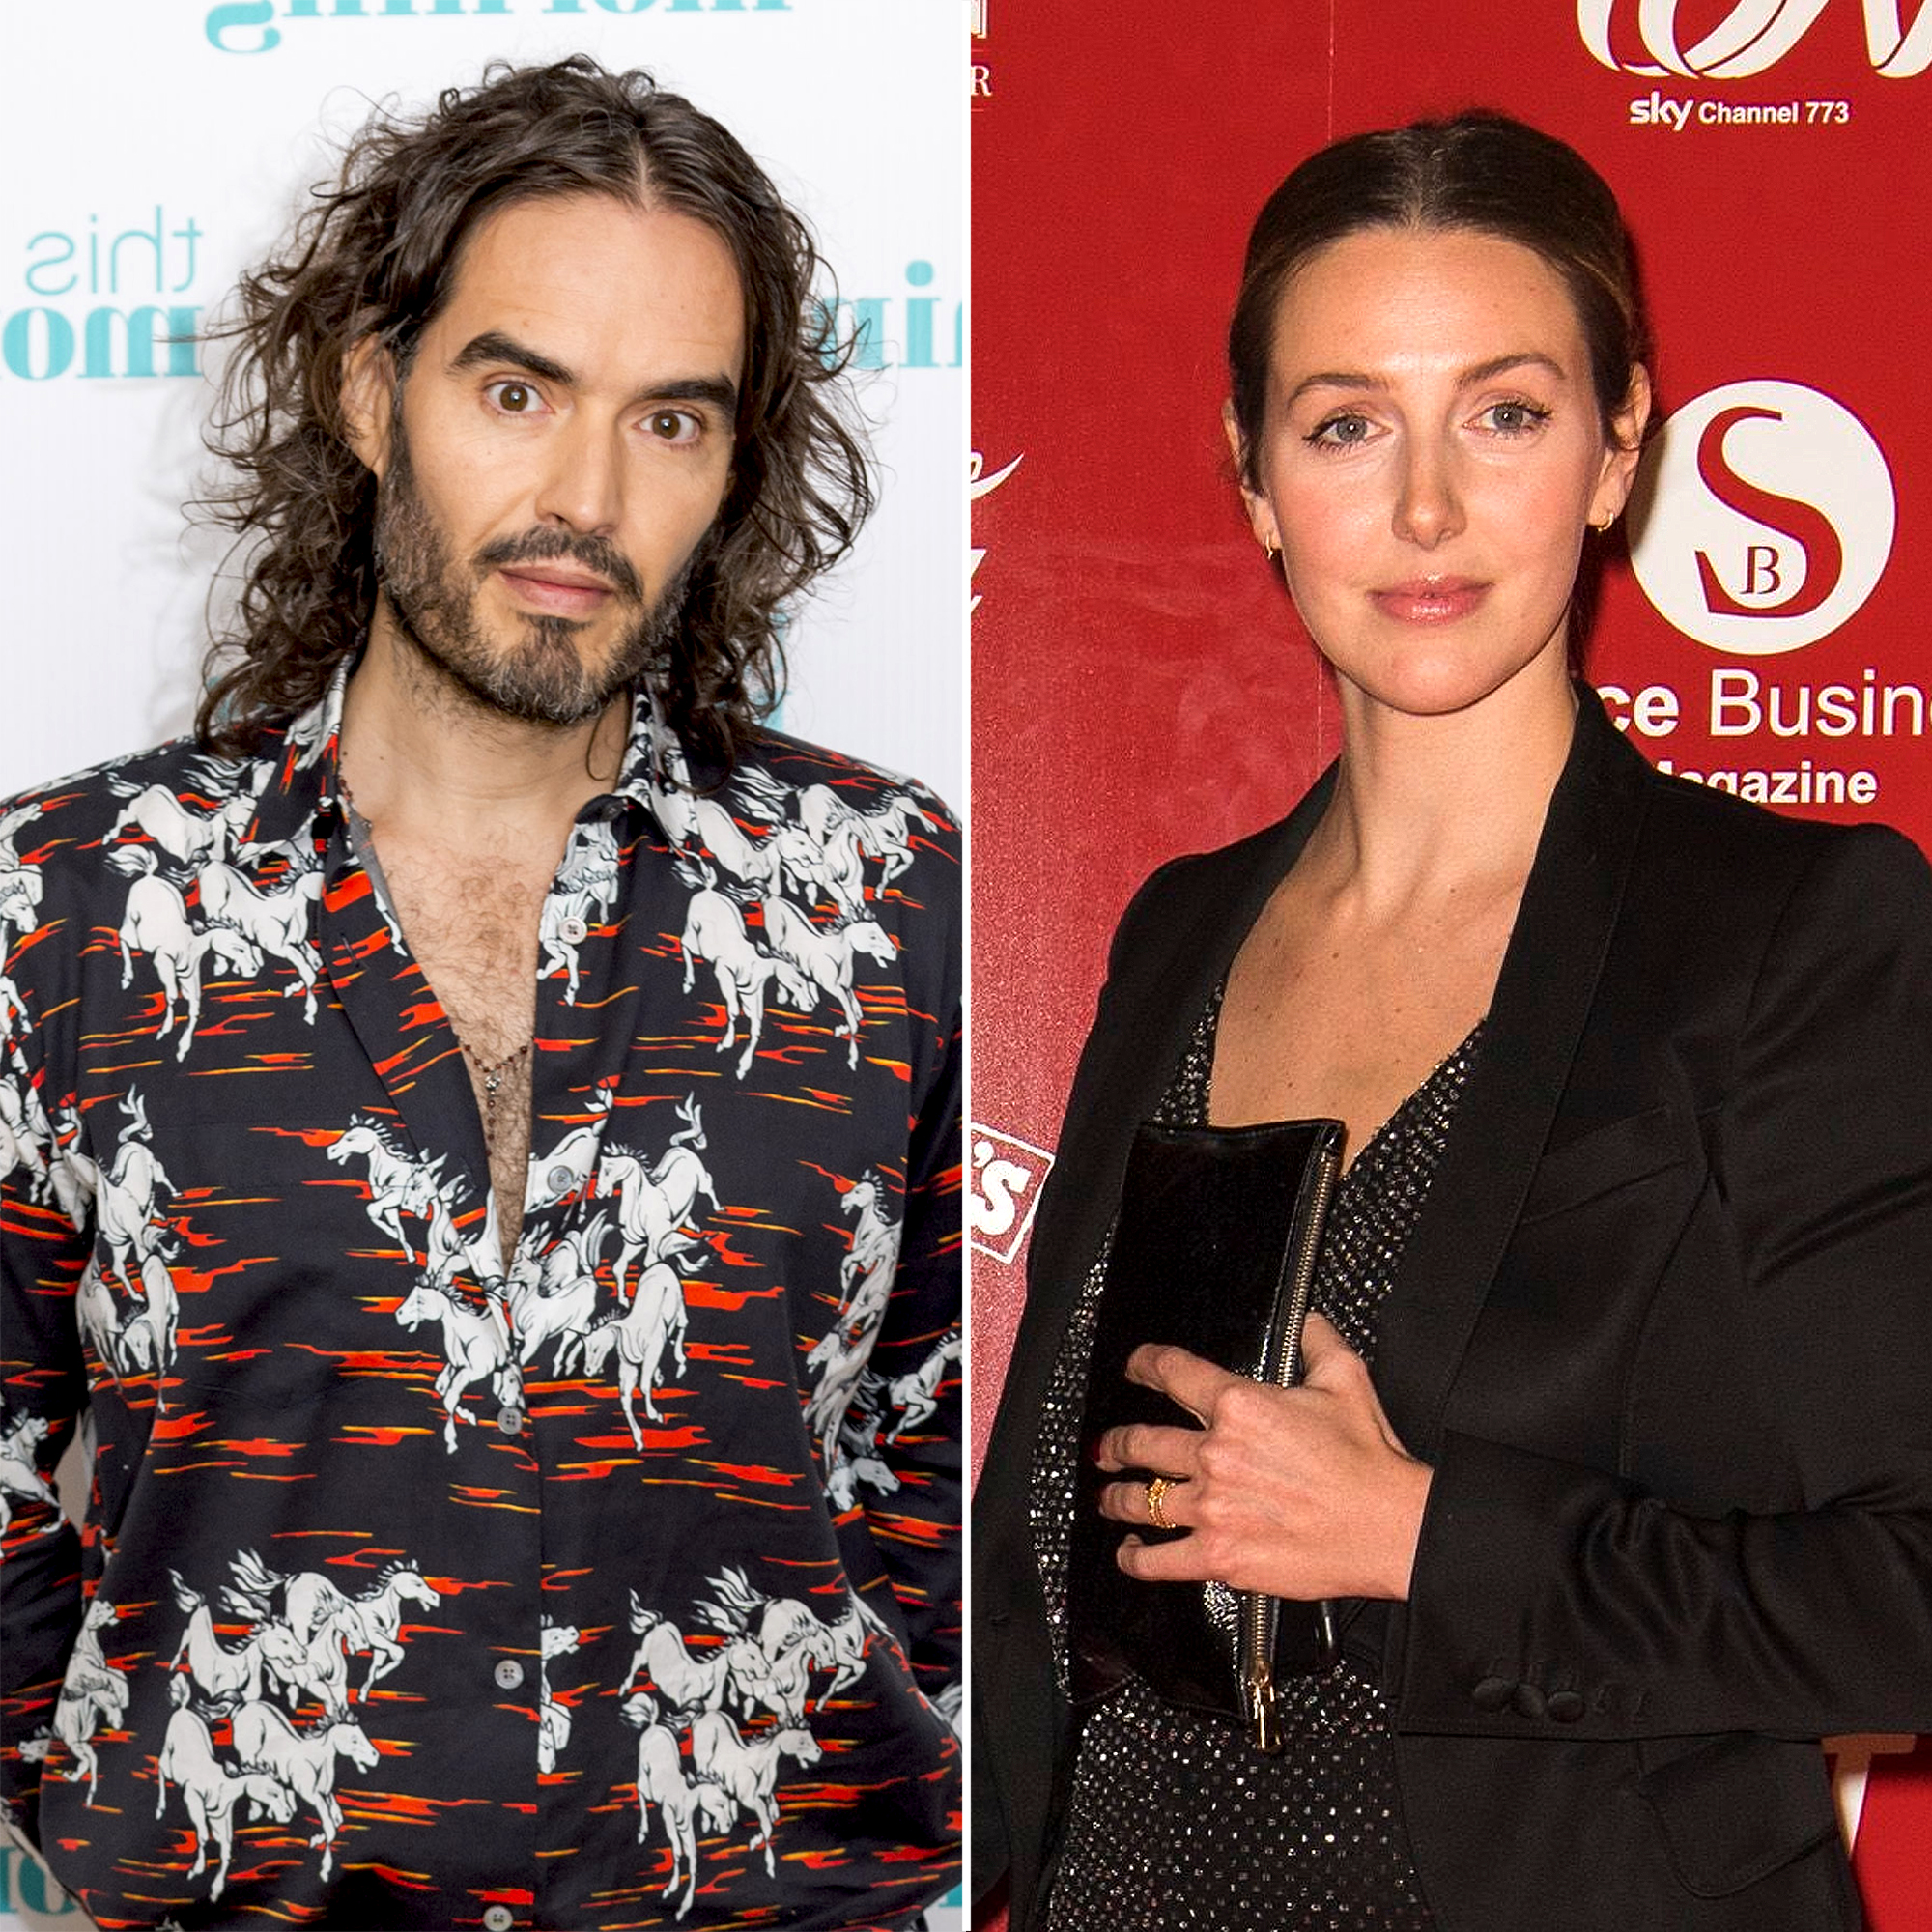 Russell Brand Steps Out with Pregnant Fiancee Laura Gallacher After  Engagement News!: Photo 3696075, Laura Gallacher, Pregnant Celebrities,  Russell Brand Photos